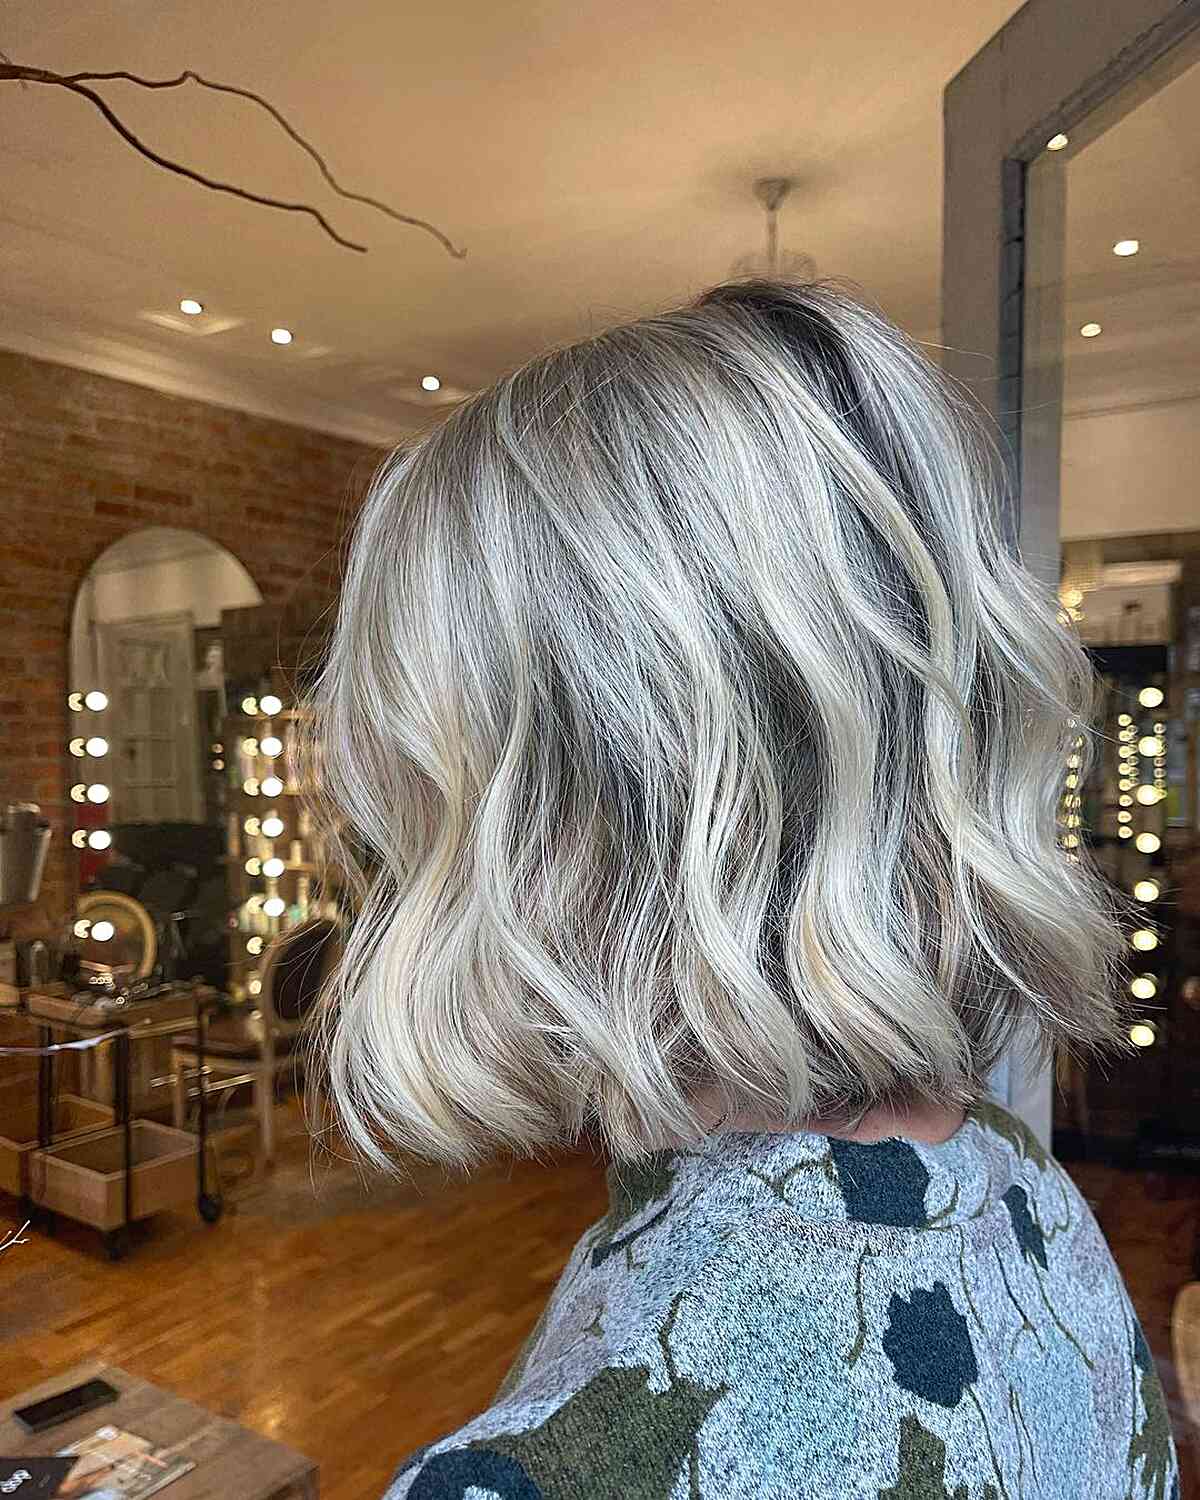 Neck-Length Textured Wavy Bob with Blonde Highlights